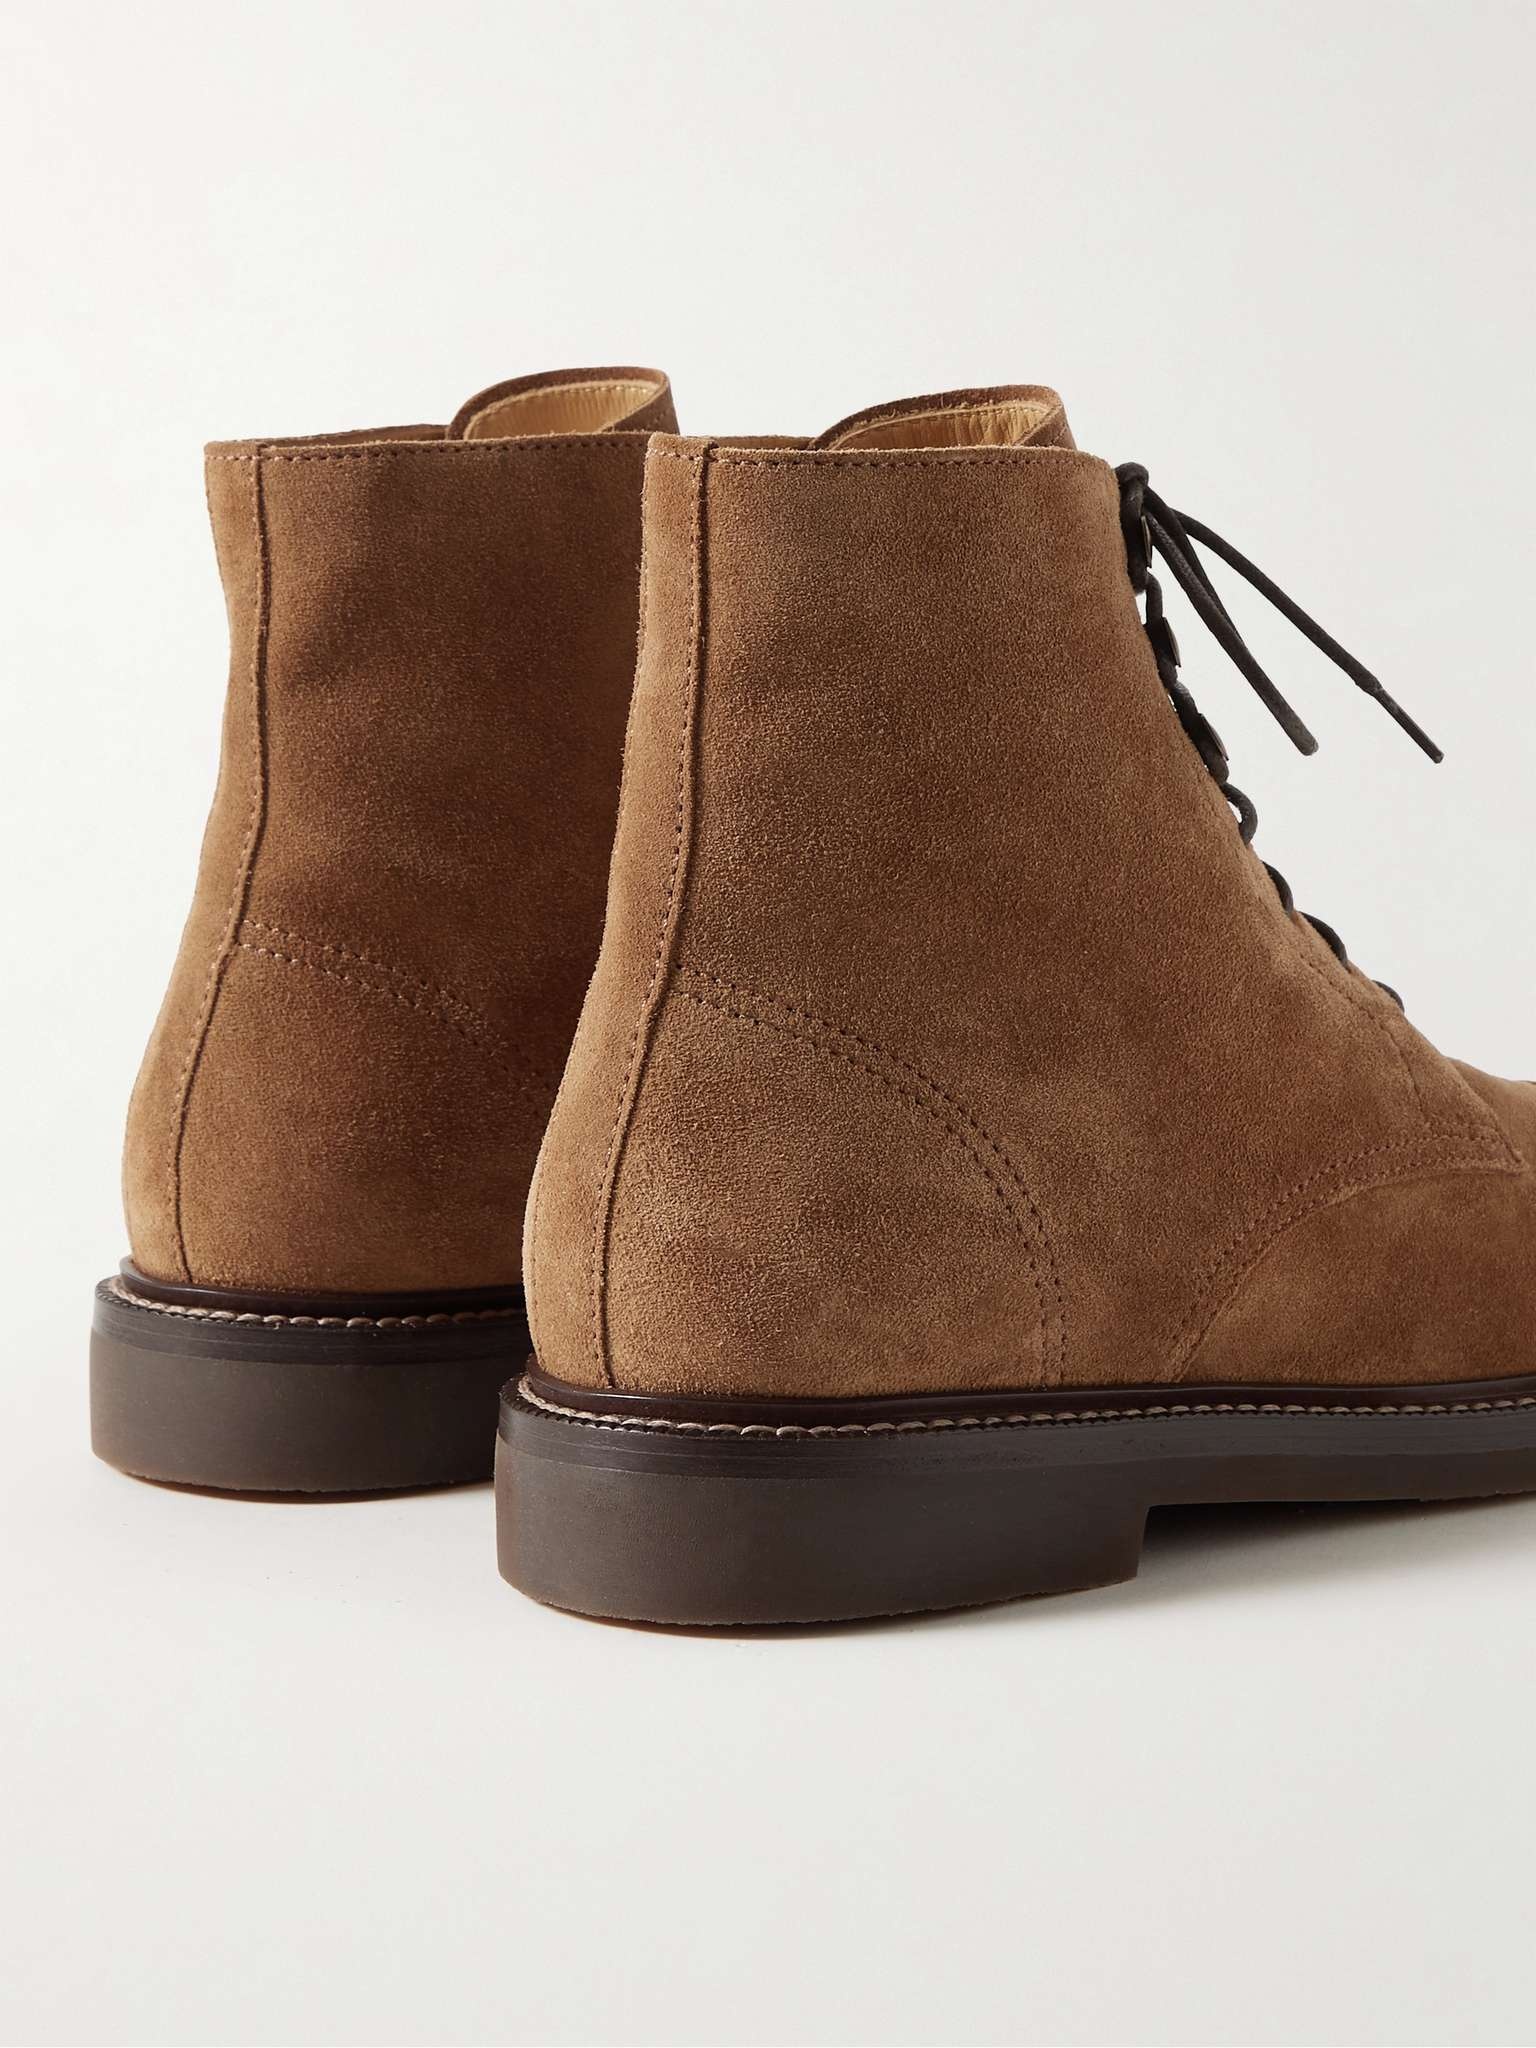 Suede Boots - 5